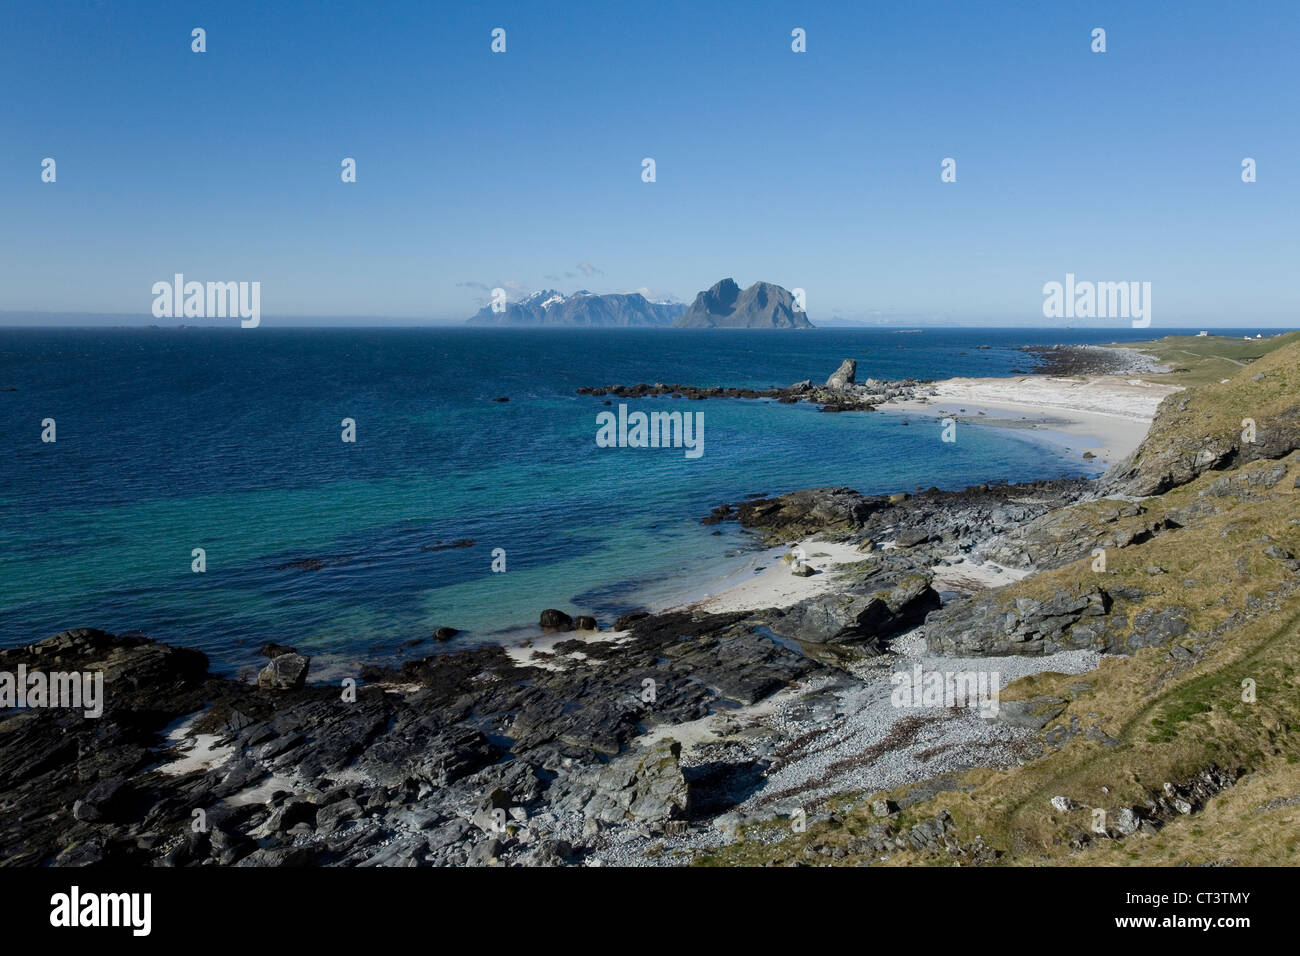 The coastline of Vaeroy in the Lofoten Islands, Norway, with Moskenesøya visible in the distance Stock Photo